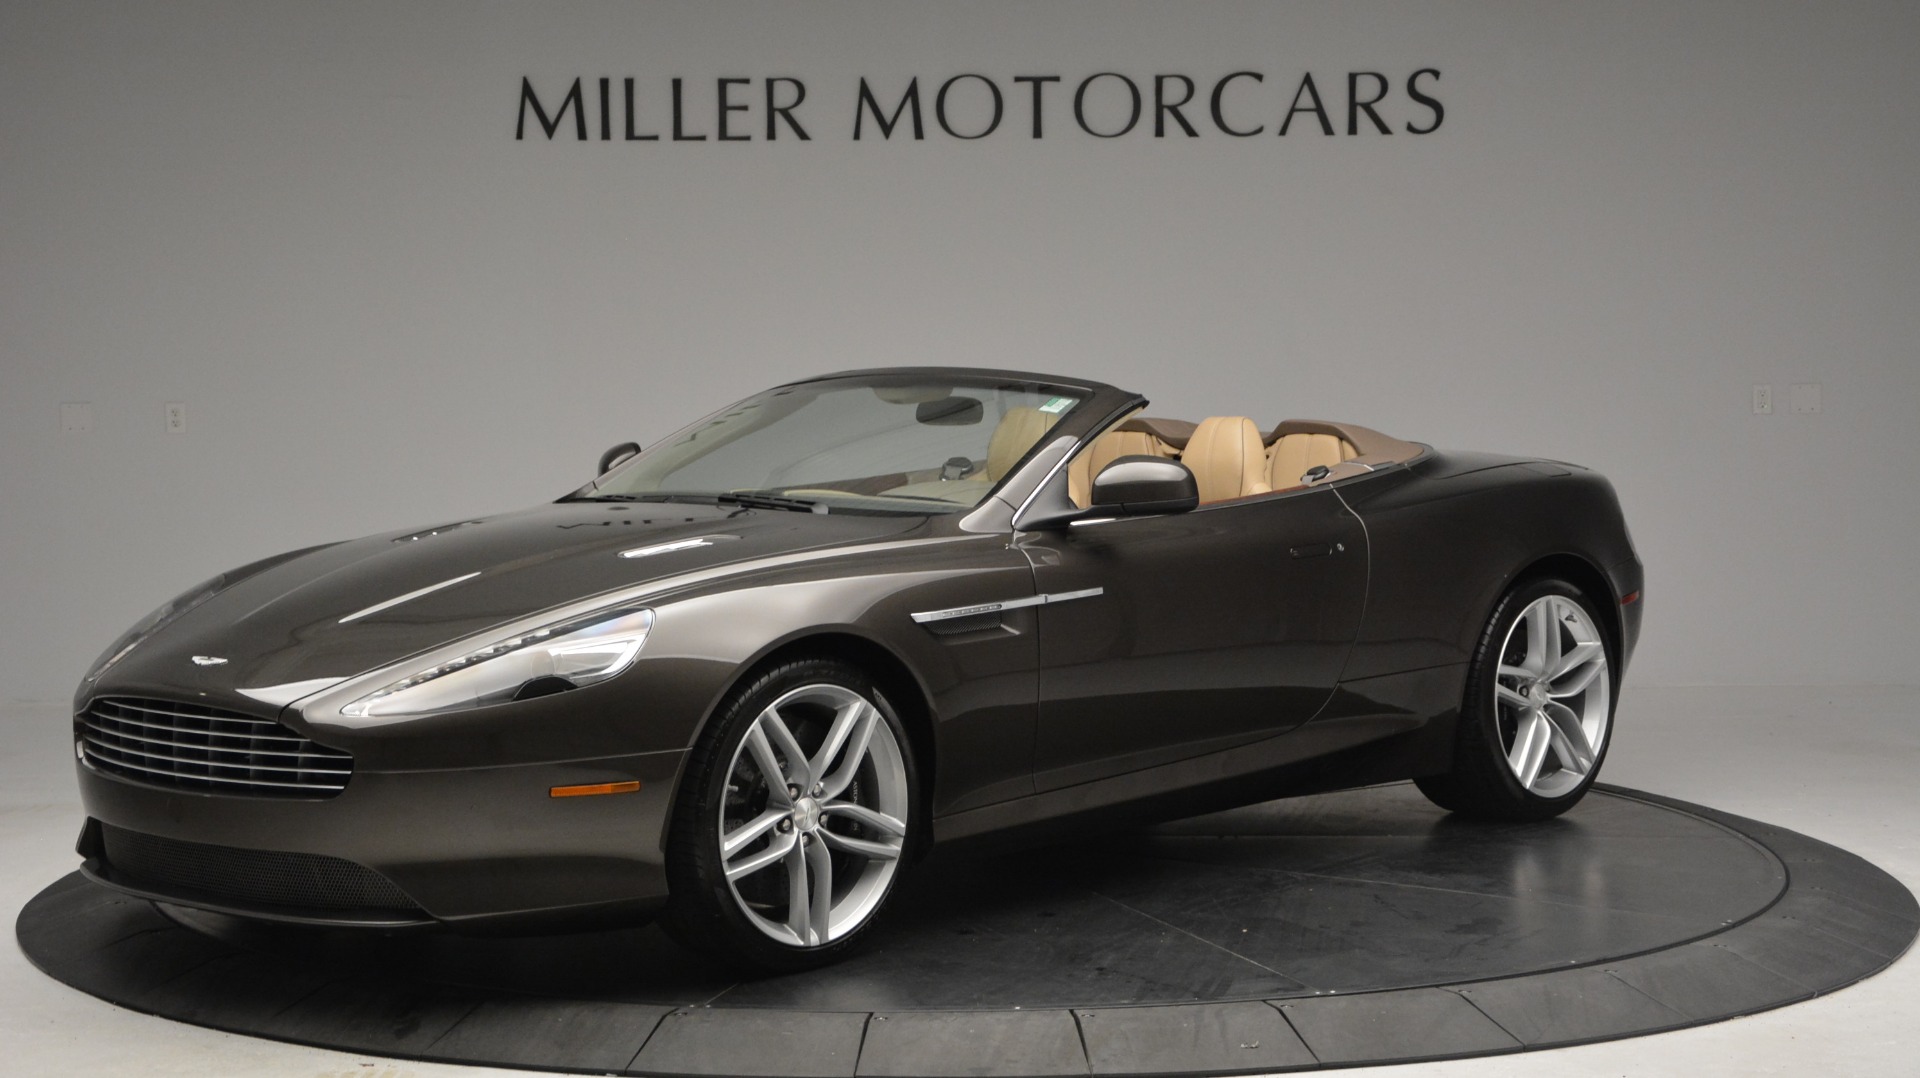 Used 2012 Aston Martin Virage Convertible for sale Sold at Bentley Greenwich in Greenwich CT 06830 1